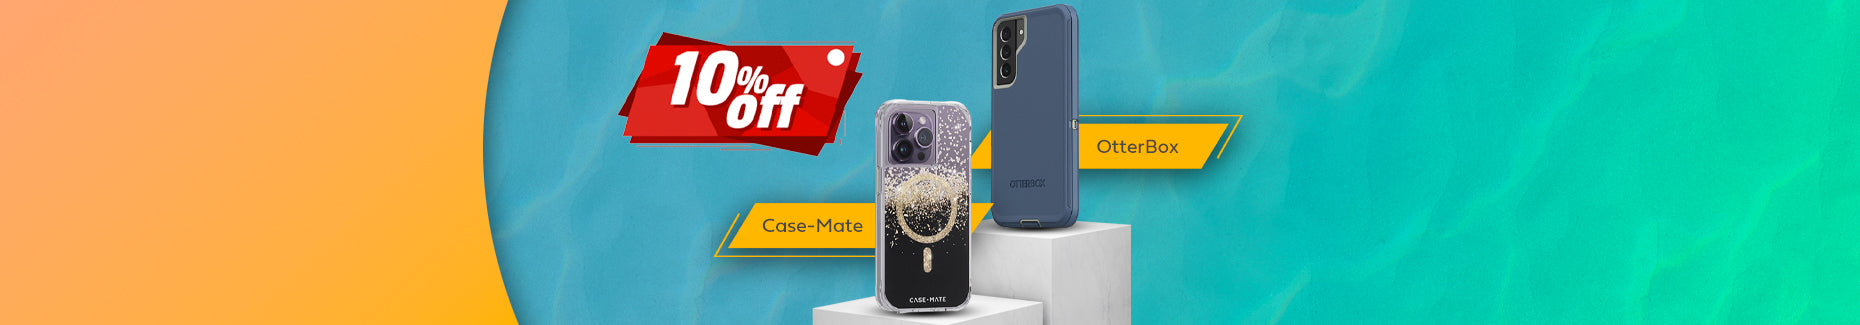 Case-Mate and Otterbox